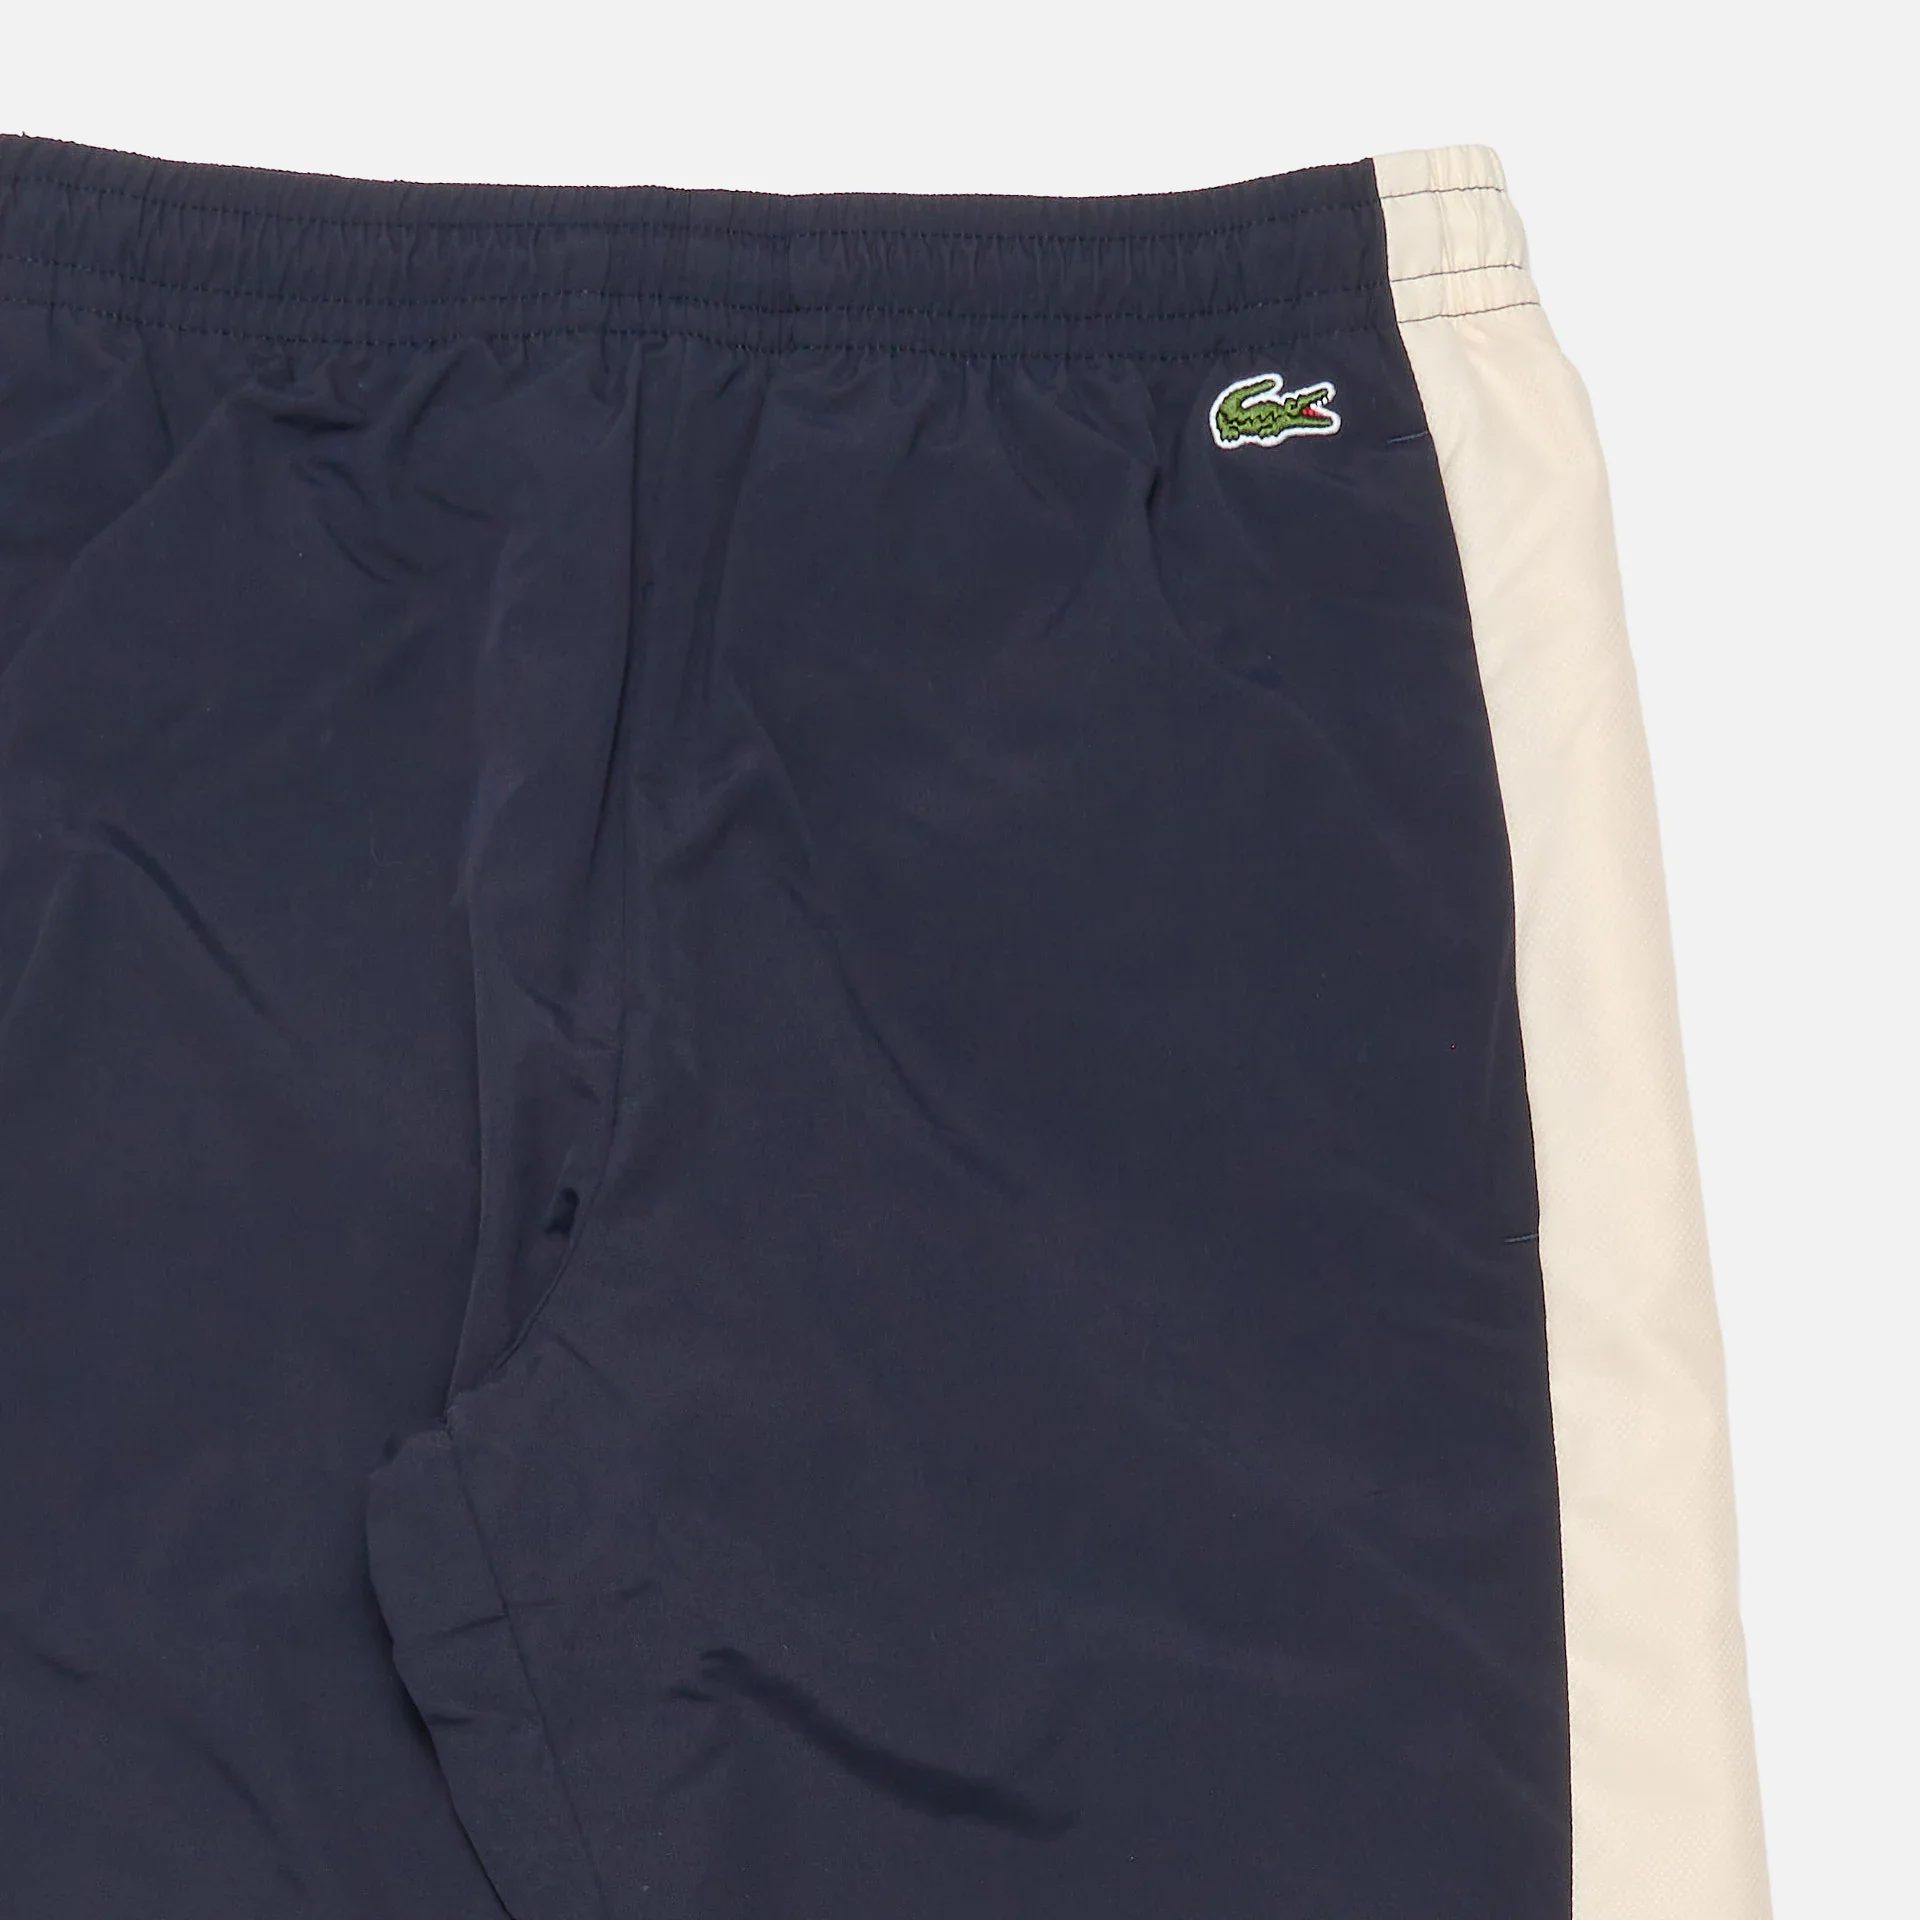 Lacoste Water Repellent Recycled Fiber Track Pants Abysm/Cookie/Lapland